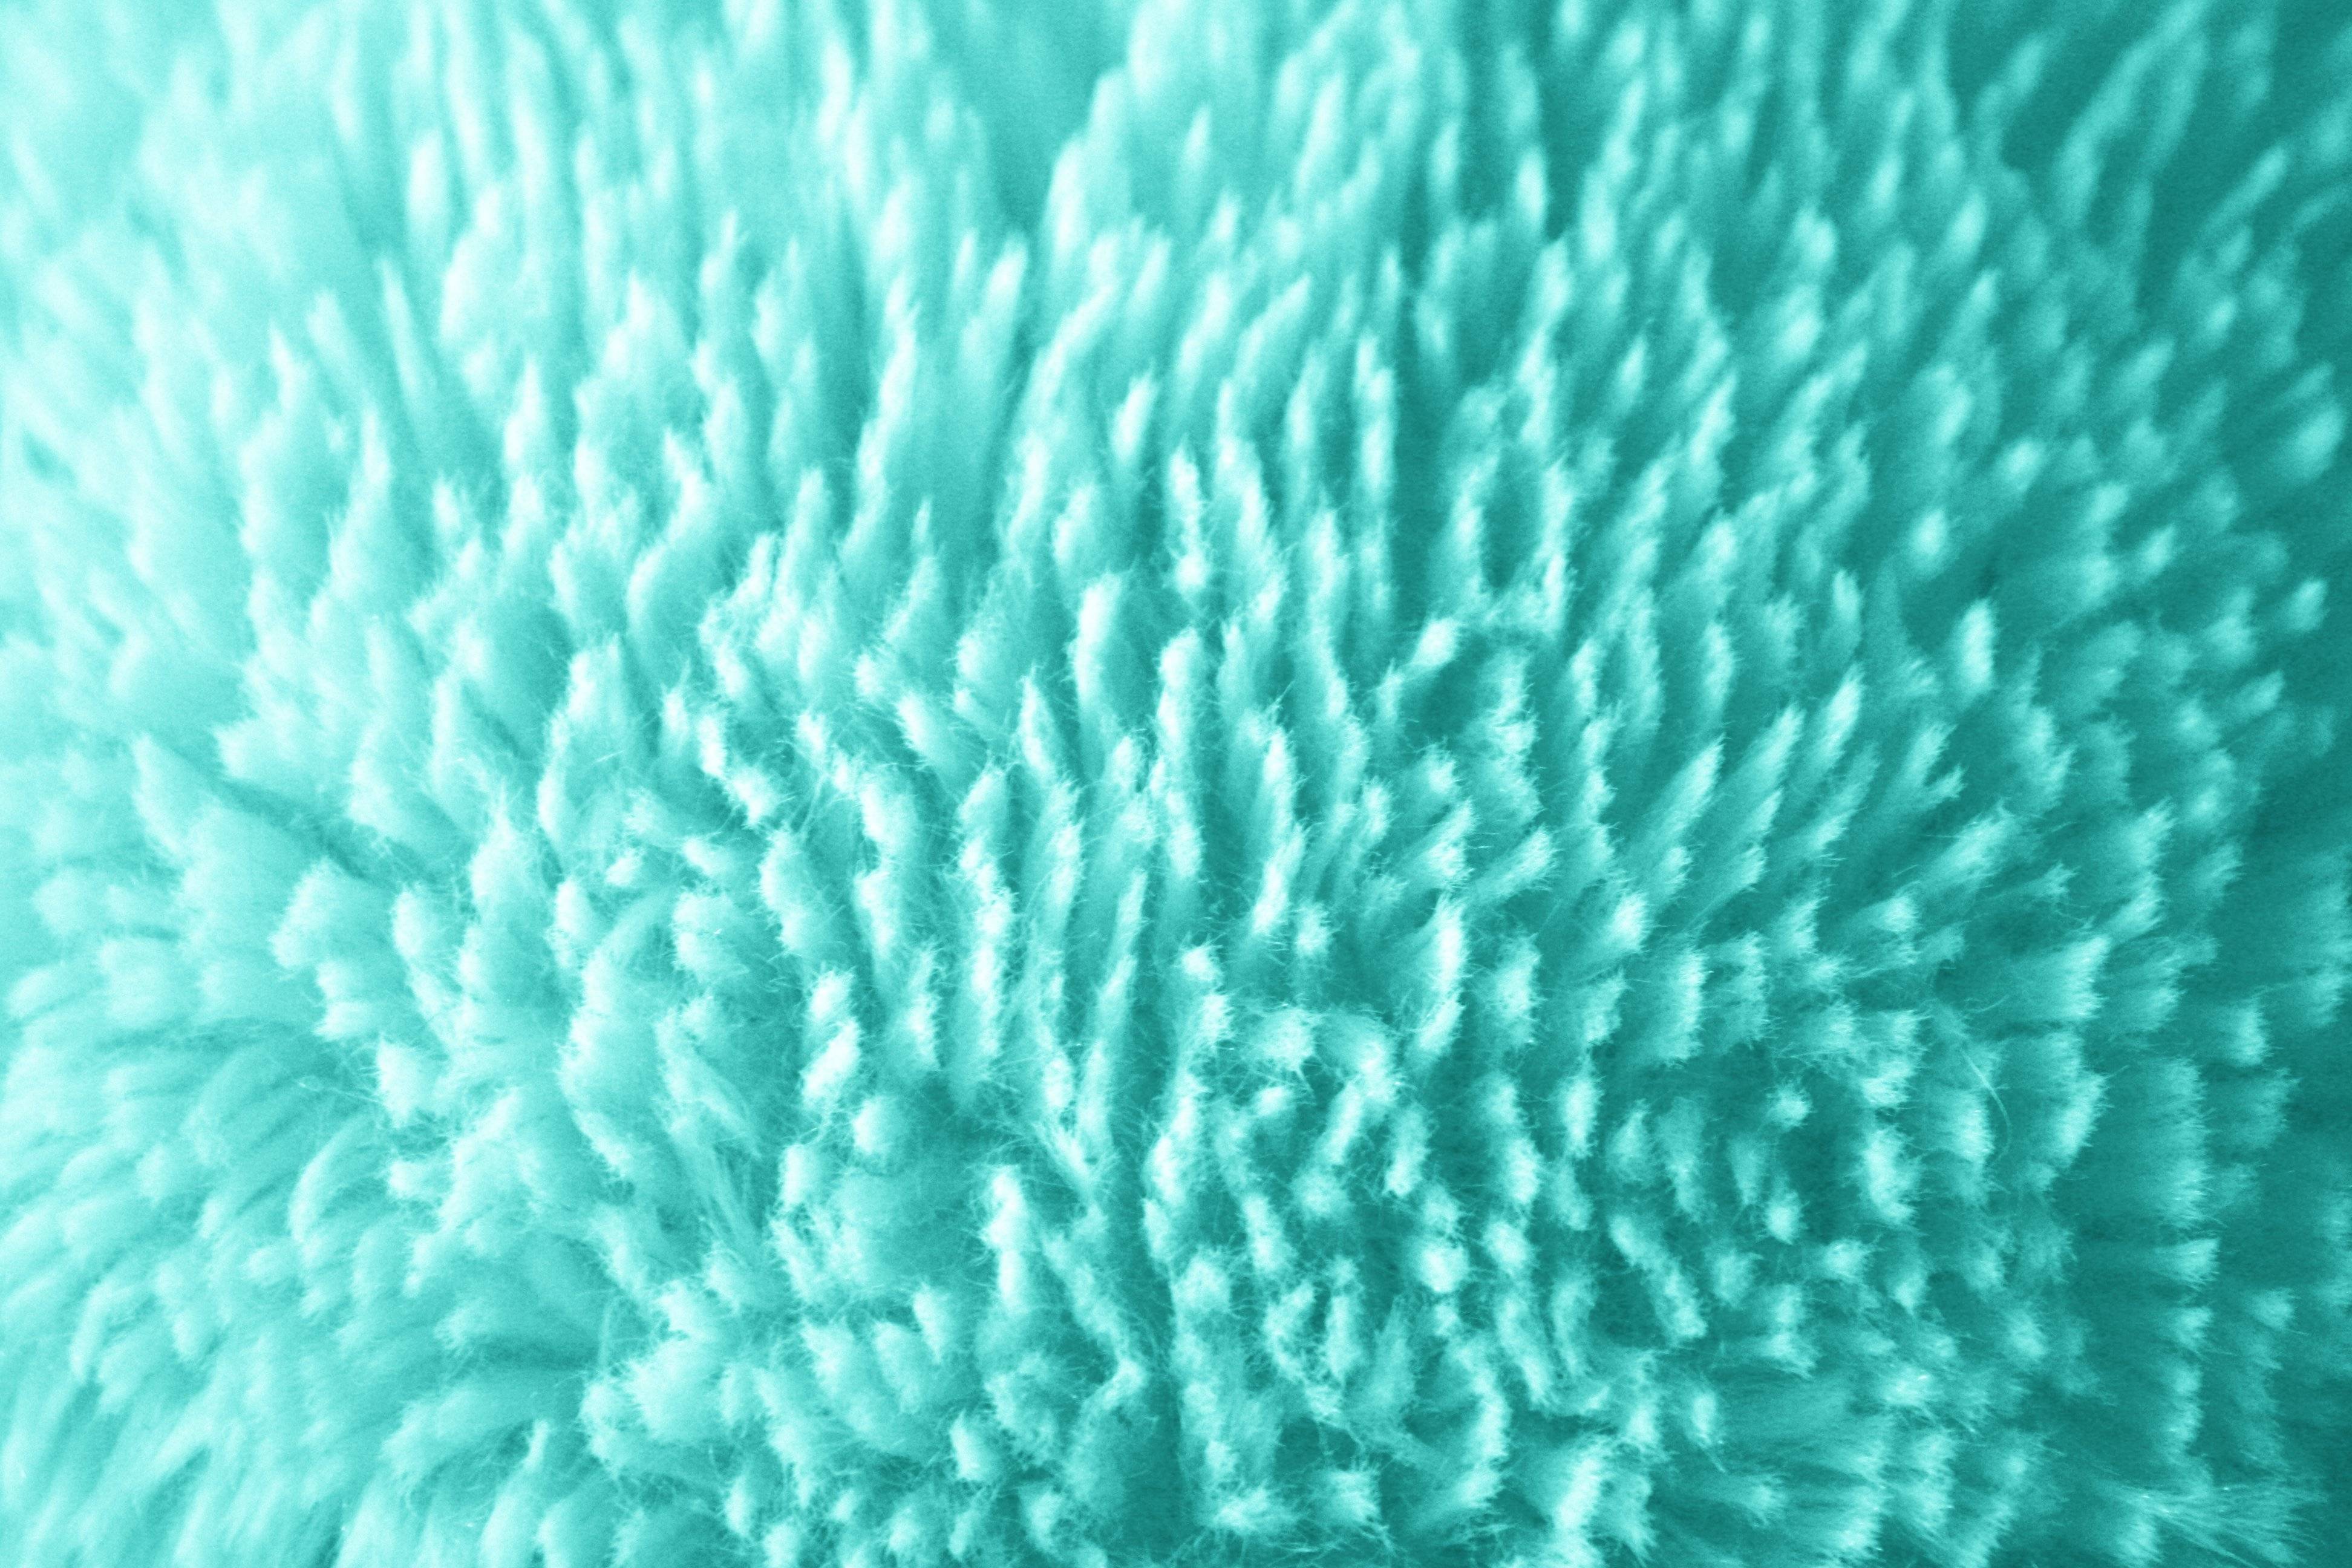 Plush Teal Fabric Texture Picture. Free Photograph. Photo